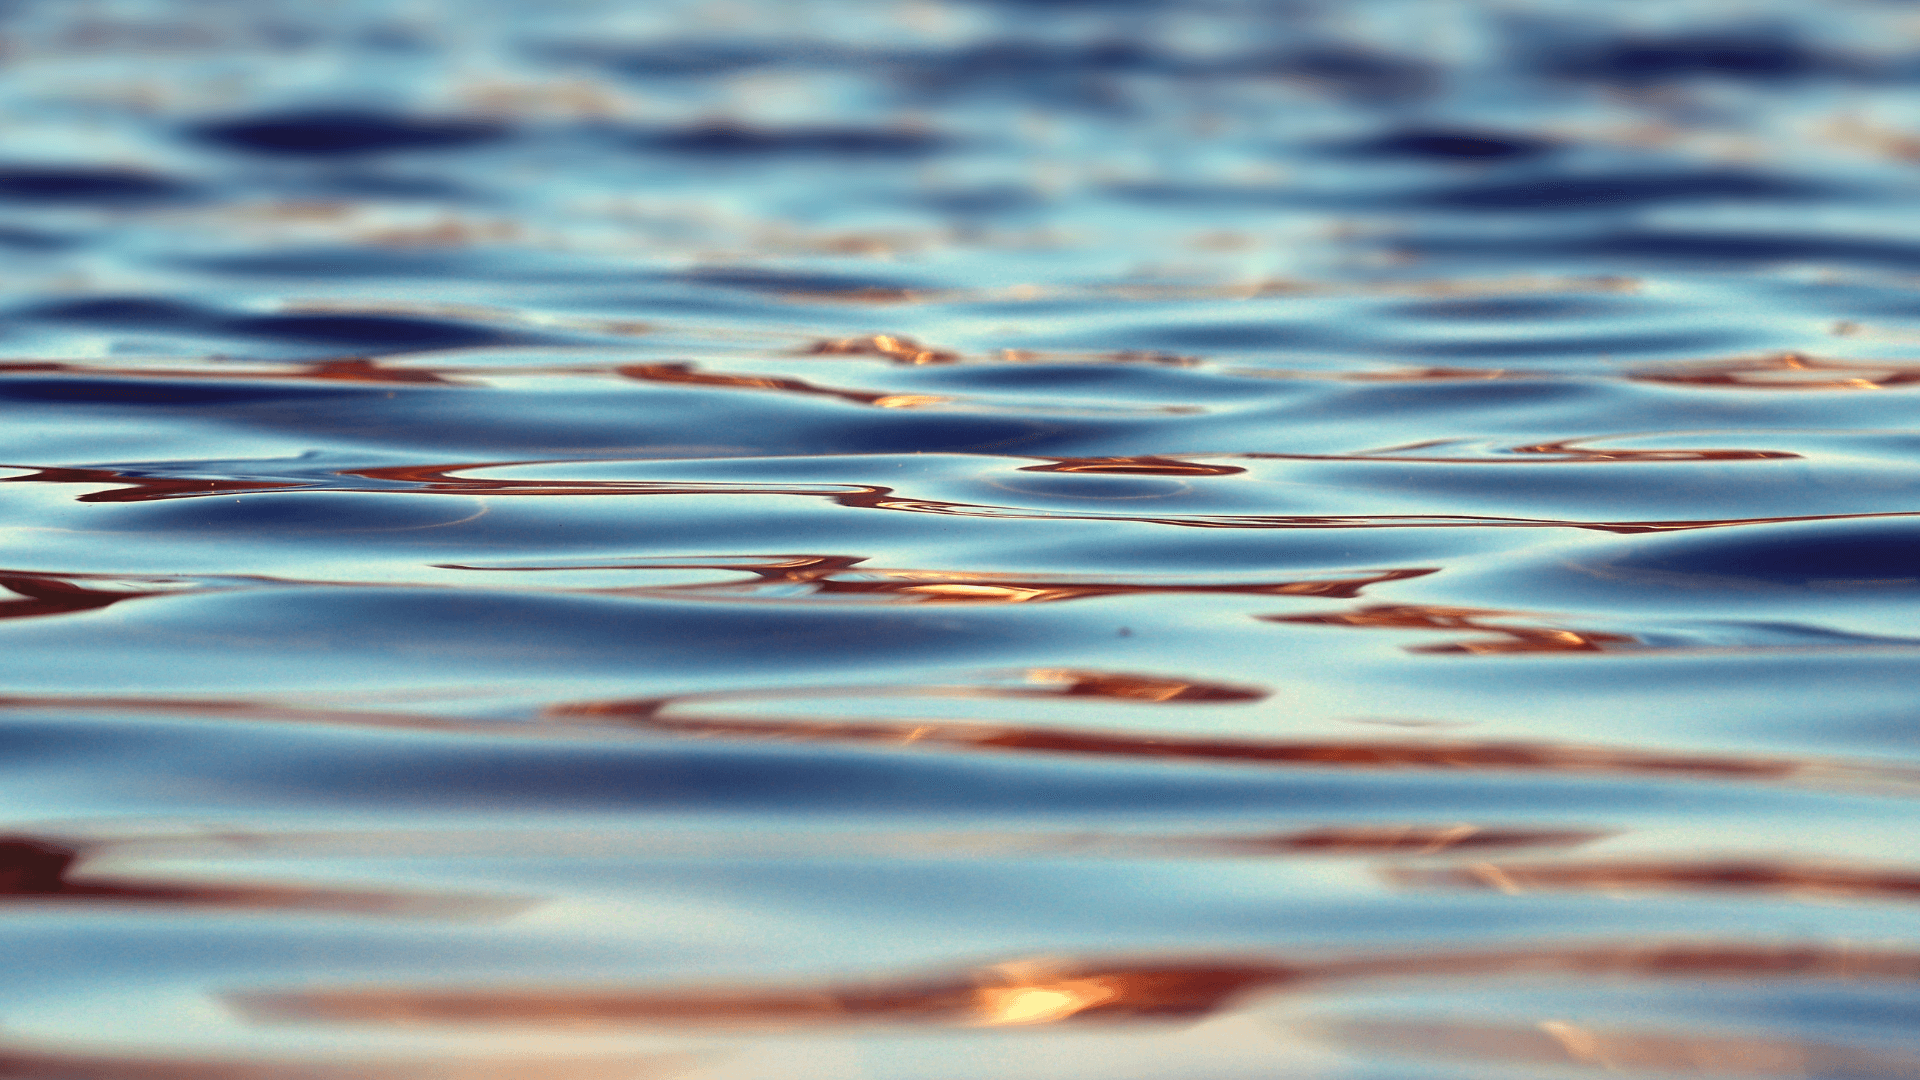 An image of ripples in water showing how small acts of kindness can create ripples of compassion across communities, teams, and organizations